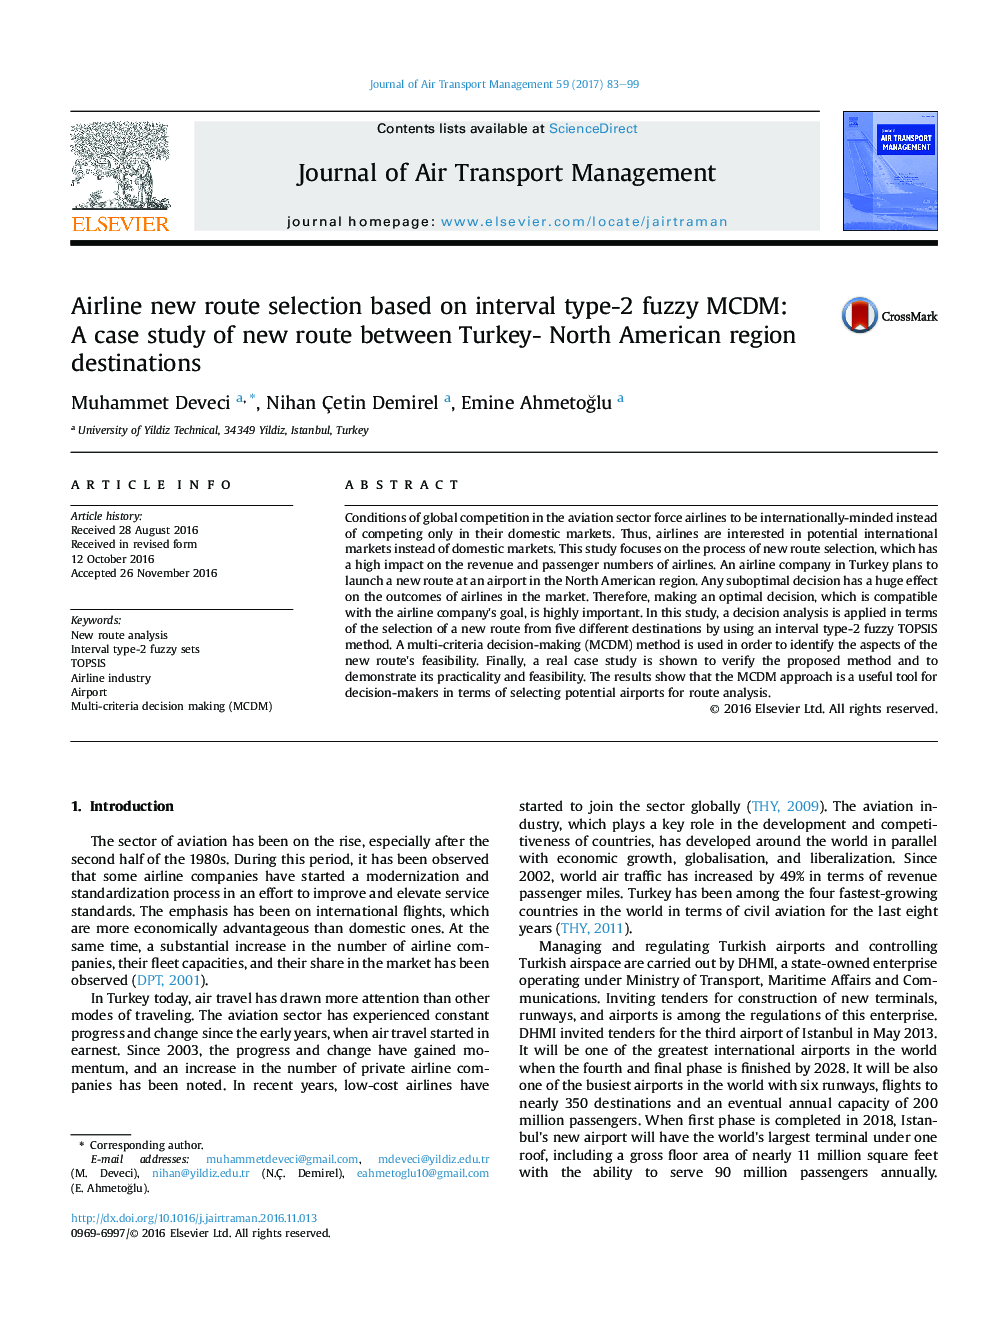 Airline new route selection based on interval type-2 fuzzy MCDM: AÂ case study of new route between Turkey- North American region destinations